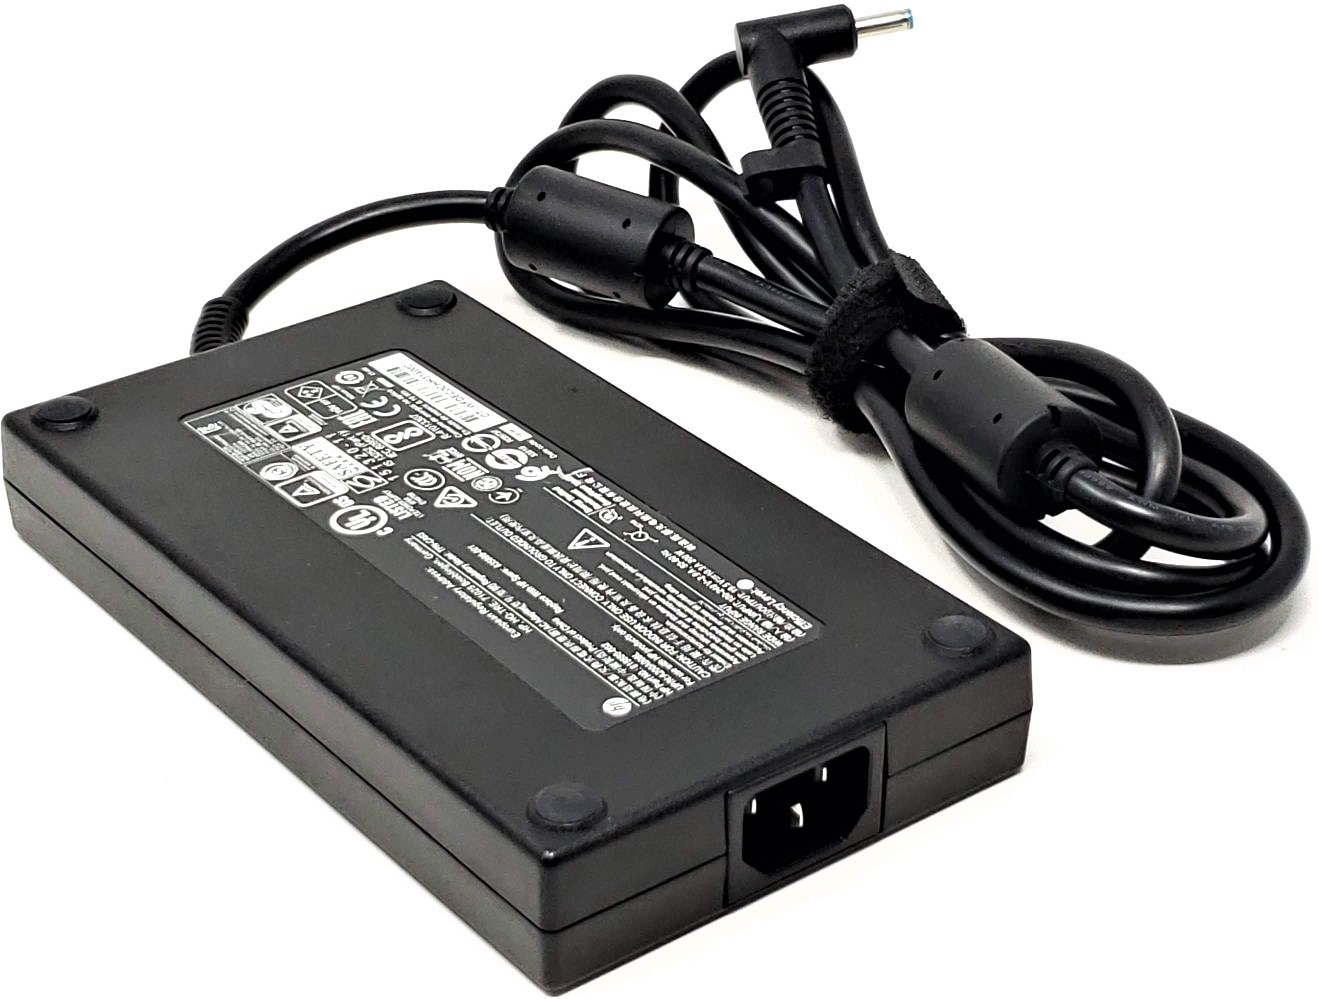 Hp 200w Laptop Charger For Hp Omen Gaming , Zen book